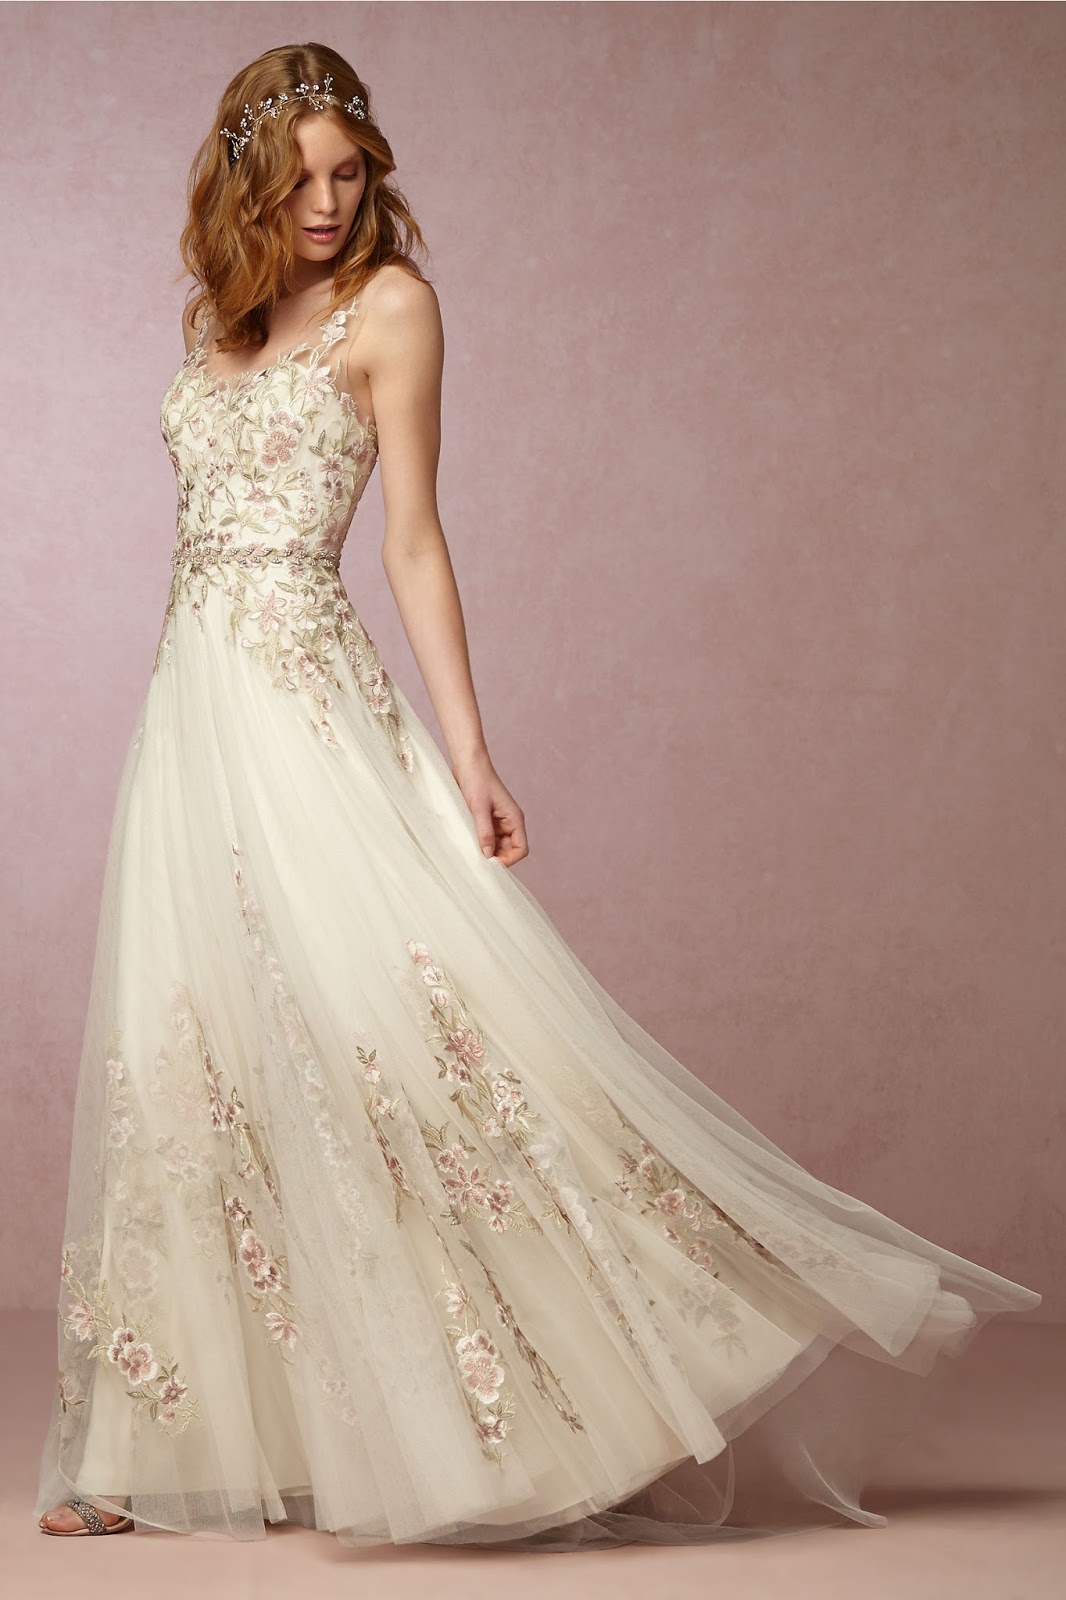 Checking out BHLDN's beautiful new arrivals...